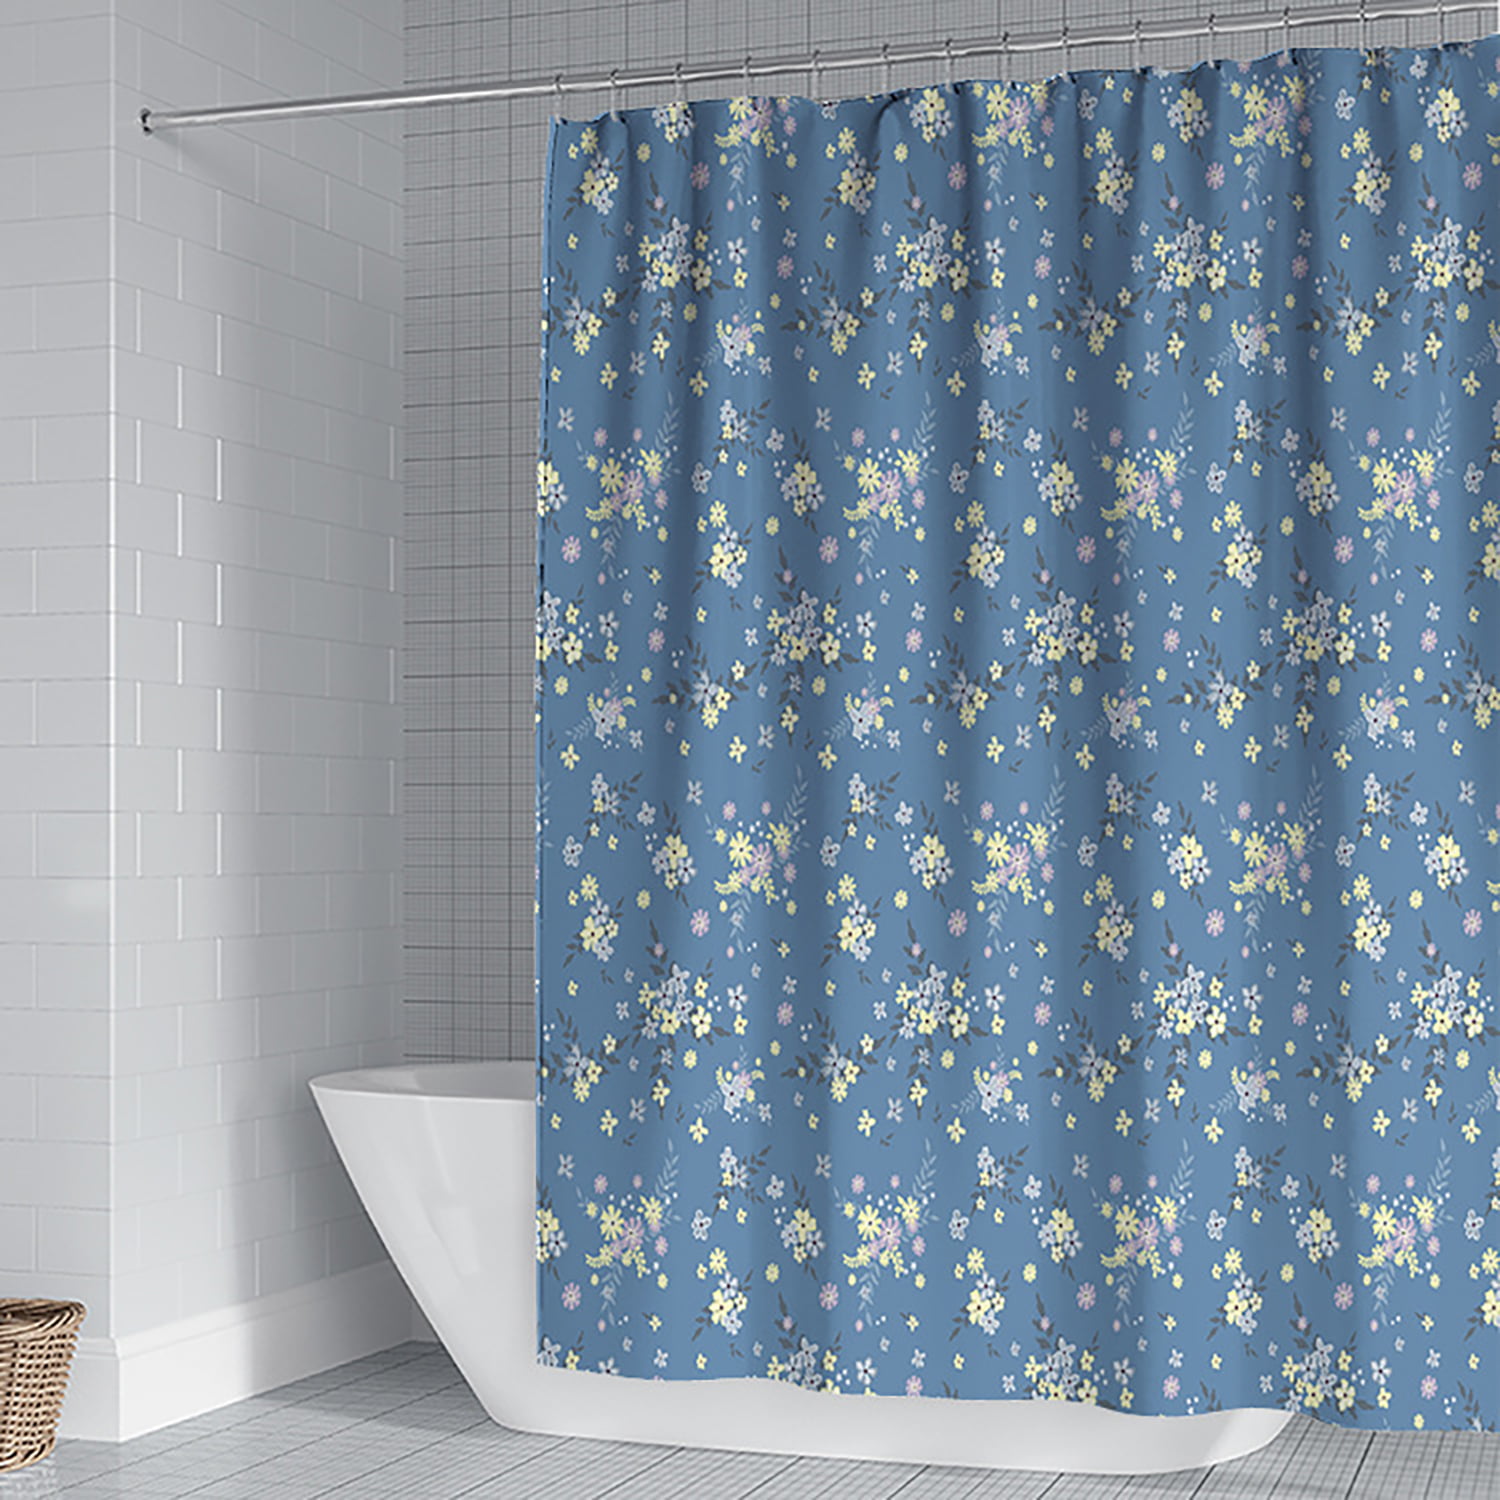 Details about   Butterflies and wildflowers Shower Curtain Bathroom Decor Fabric & 12hooks 71" 